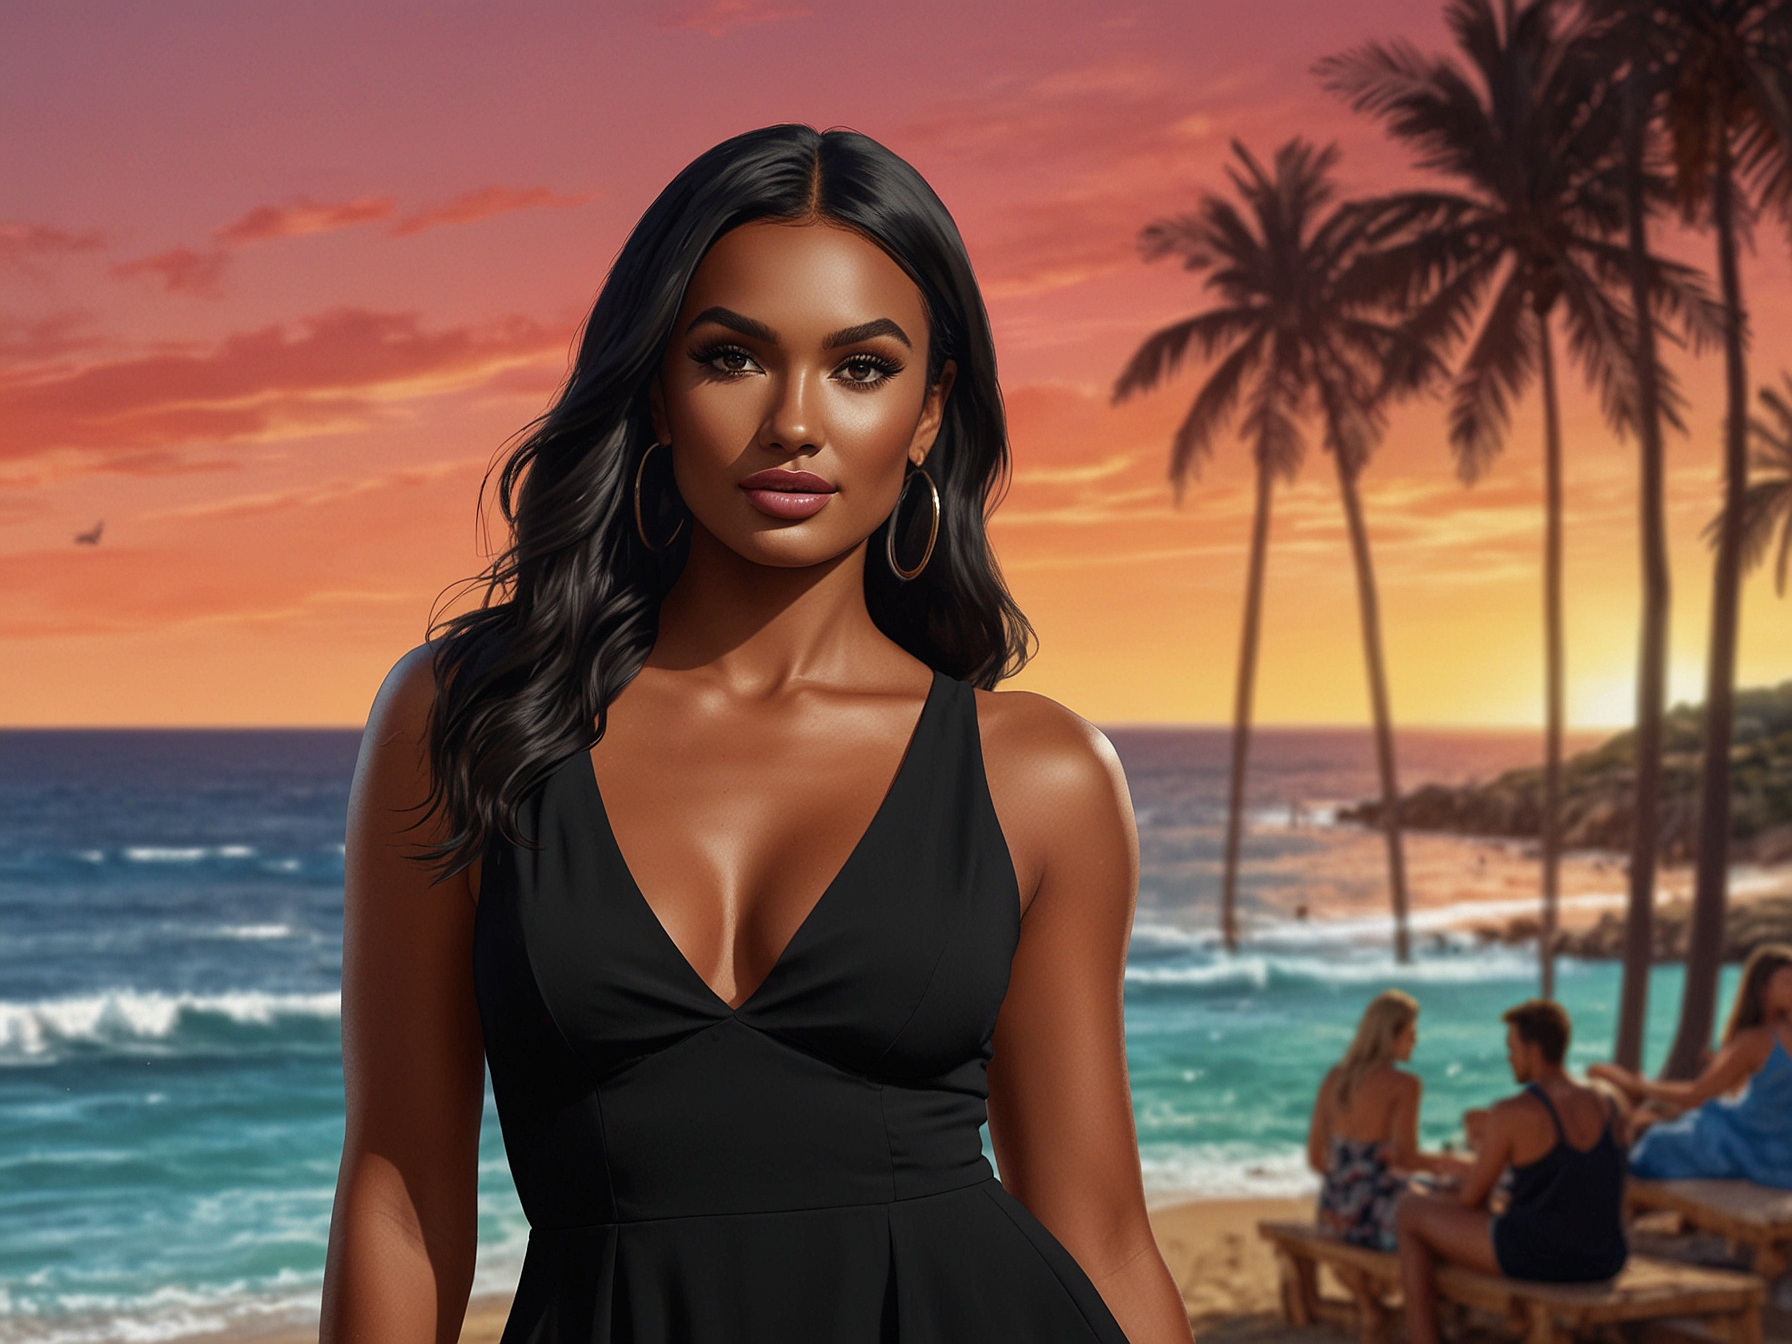 Maya Jama poses confidently on the set of Love Island Aftersun, wearing a show-stopping black mini dress.